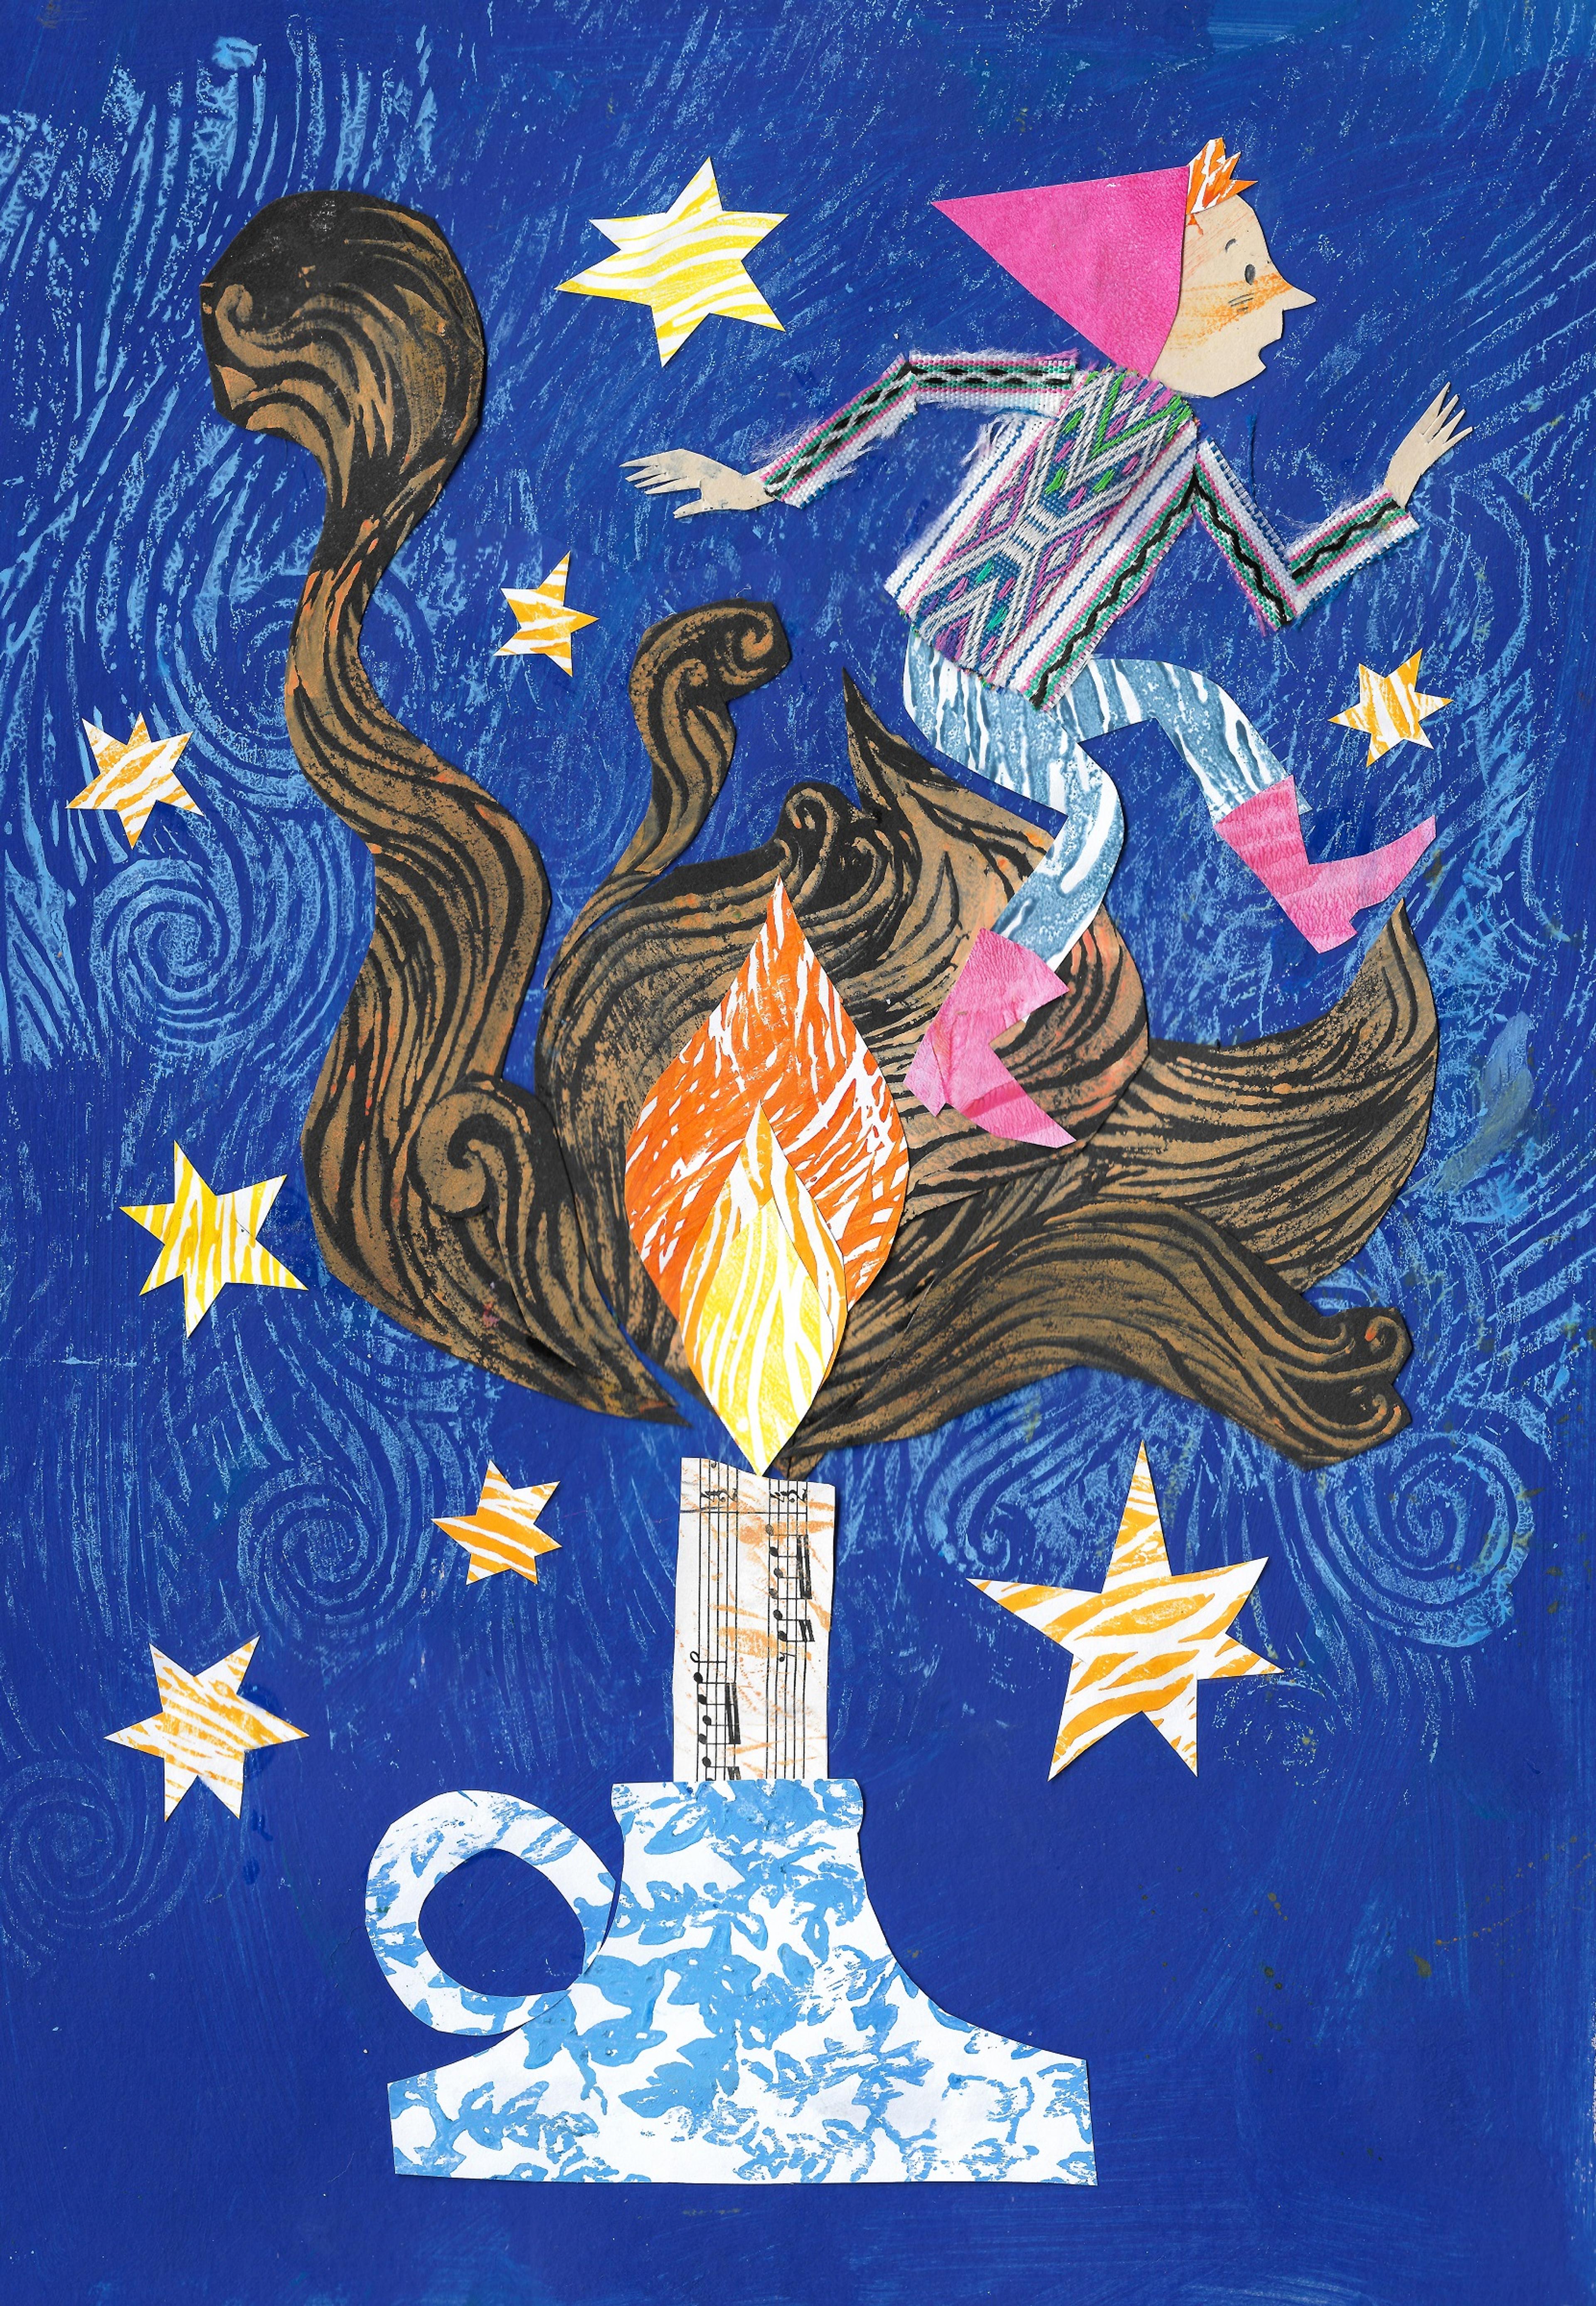 Collaged illustration of a person jumping over a candle